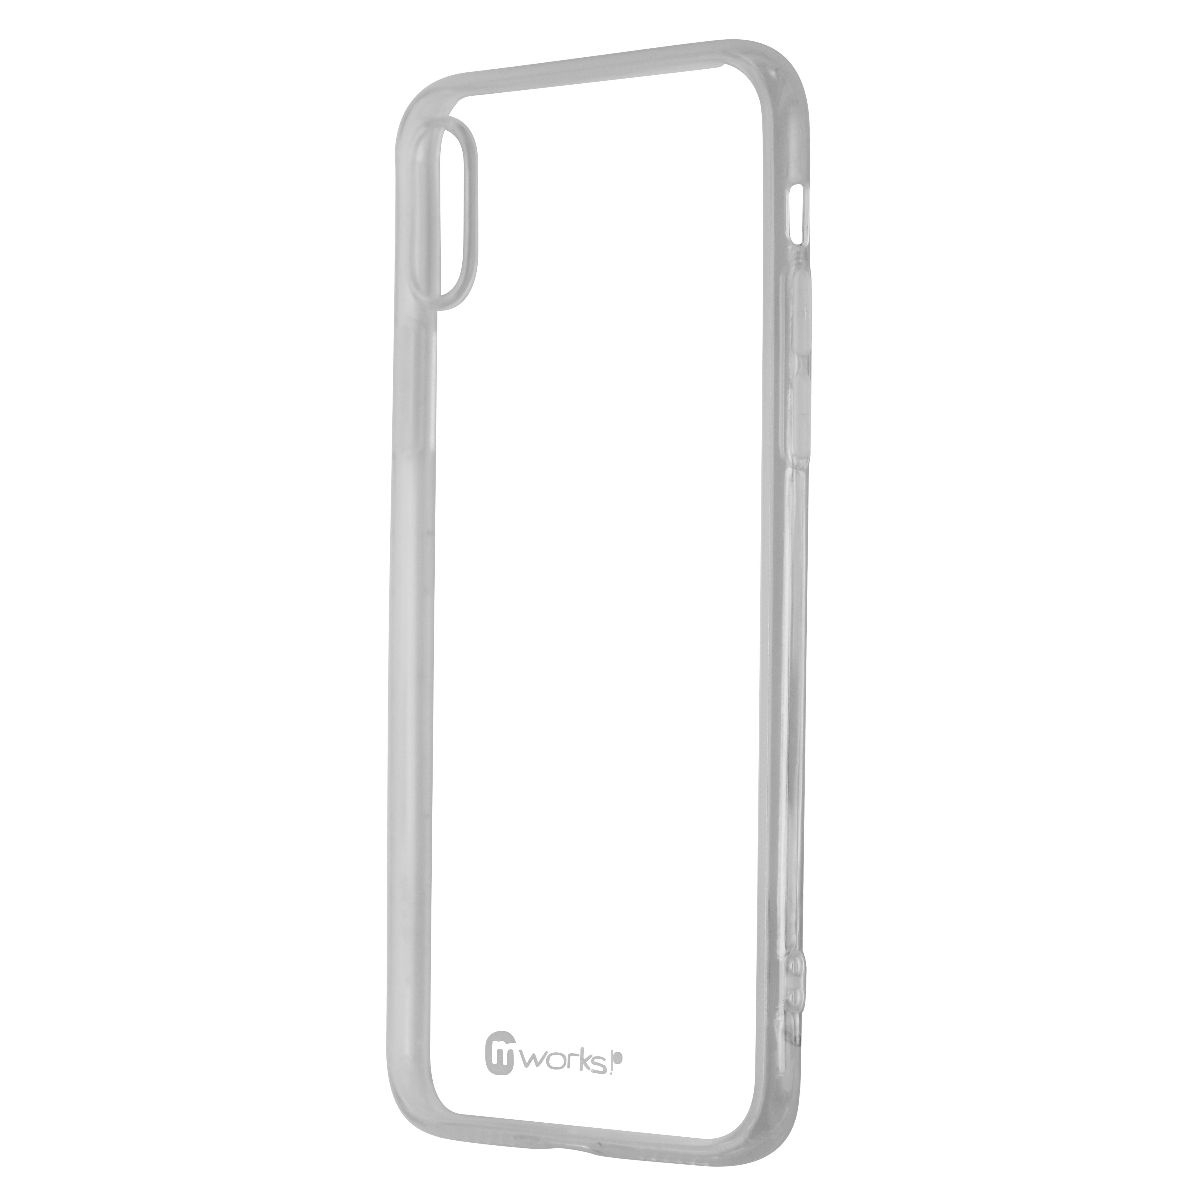 MWorks! MCASE! Protective Case For Apple IPhone X/XS - Clear